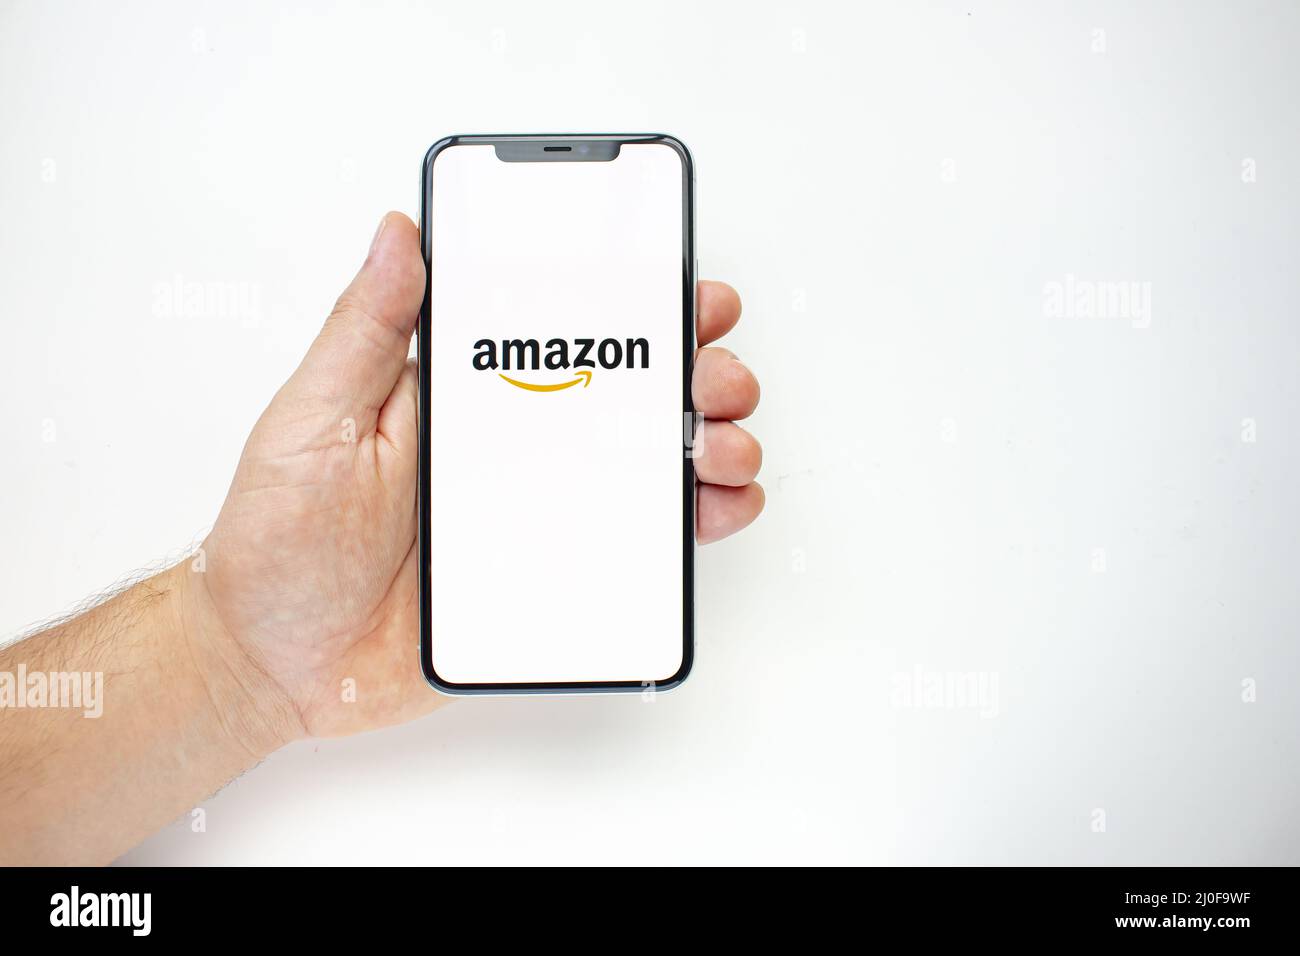 Calgary, Alberta, Canada. Aug 15, 2020. A person holding an iPhone 11 Pro Max with the Amazon App Stock Photo